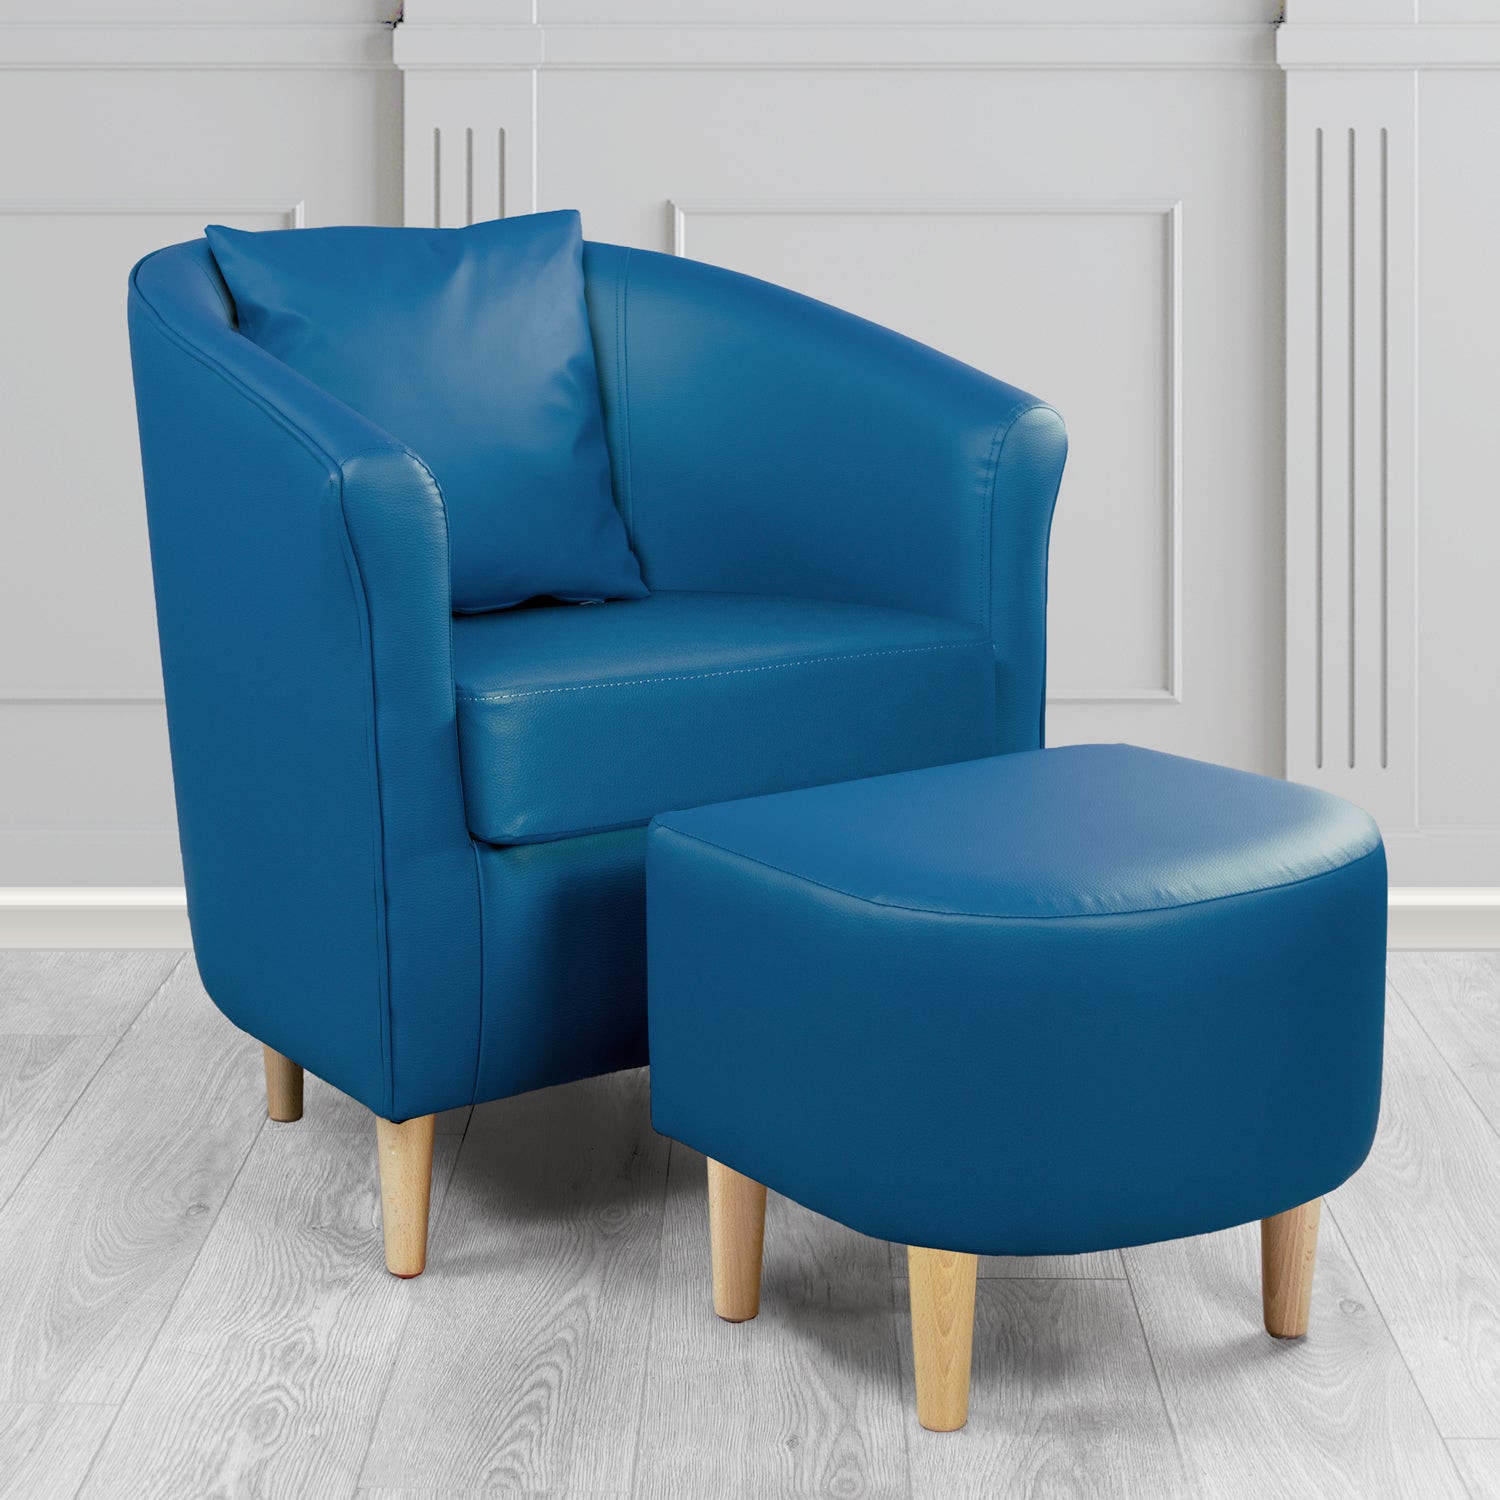 St Tropez Tub Chair with Footstool Set in Madrid Royal Faux Leather - The Tub Chair Shop